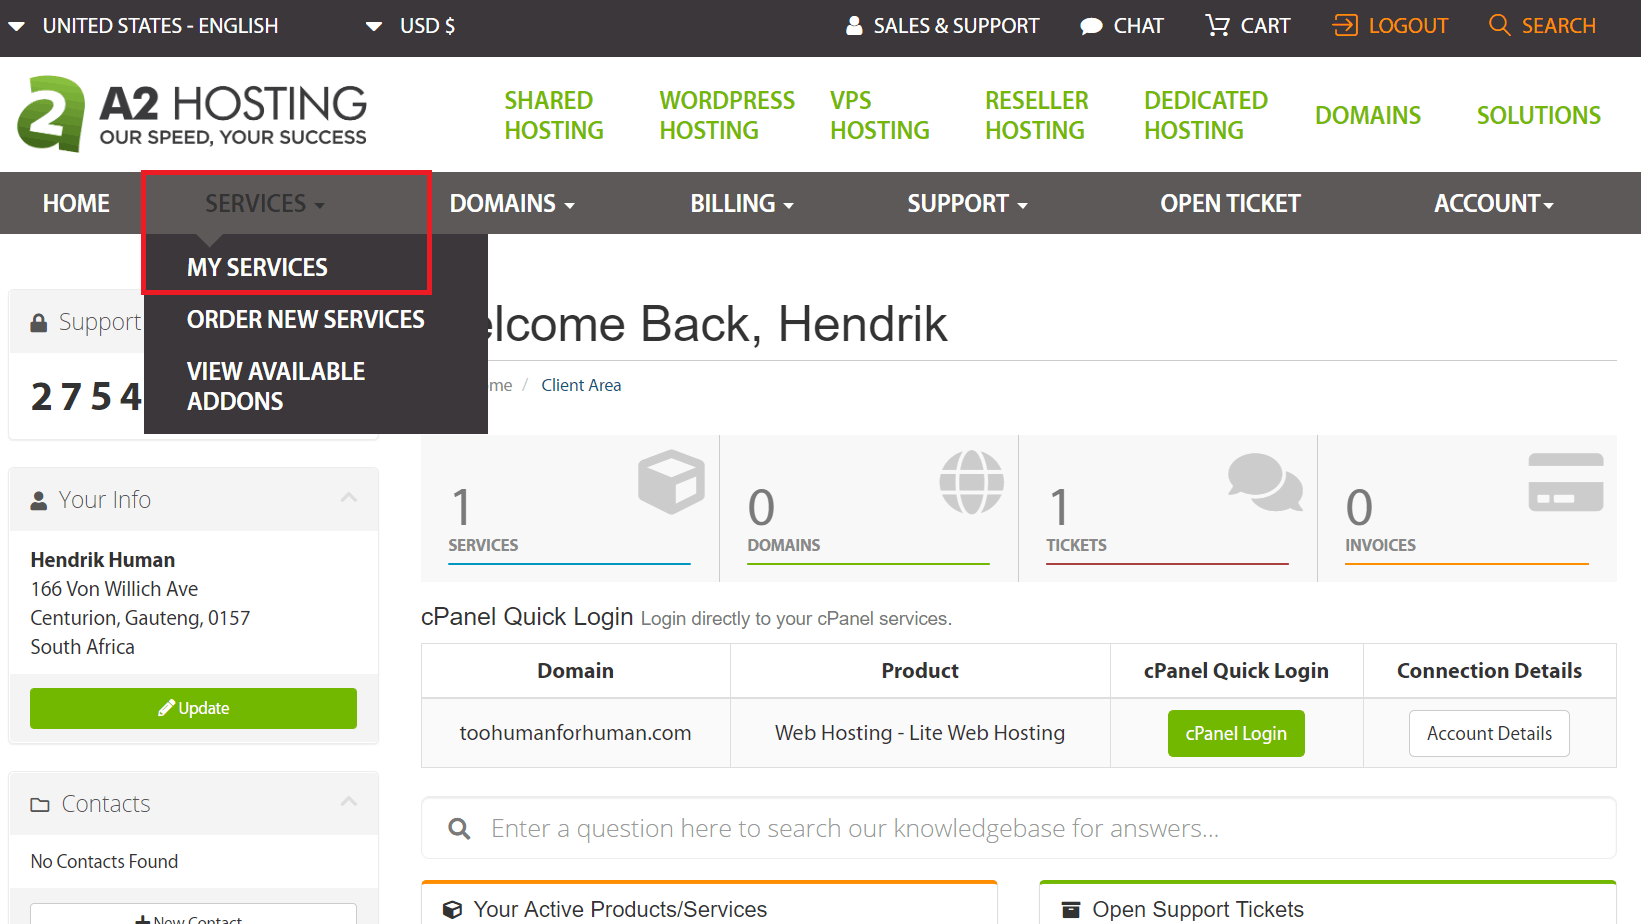 How to Cancel Your A2 Hosting Account and Get a Refund-image1